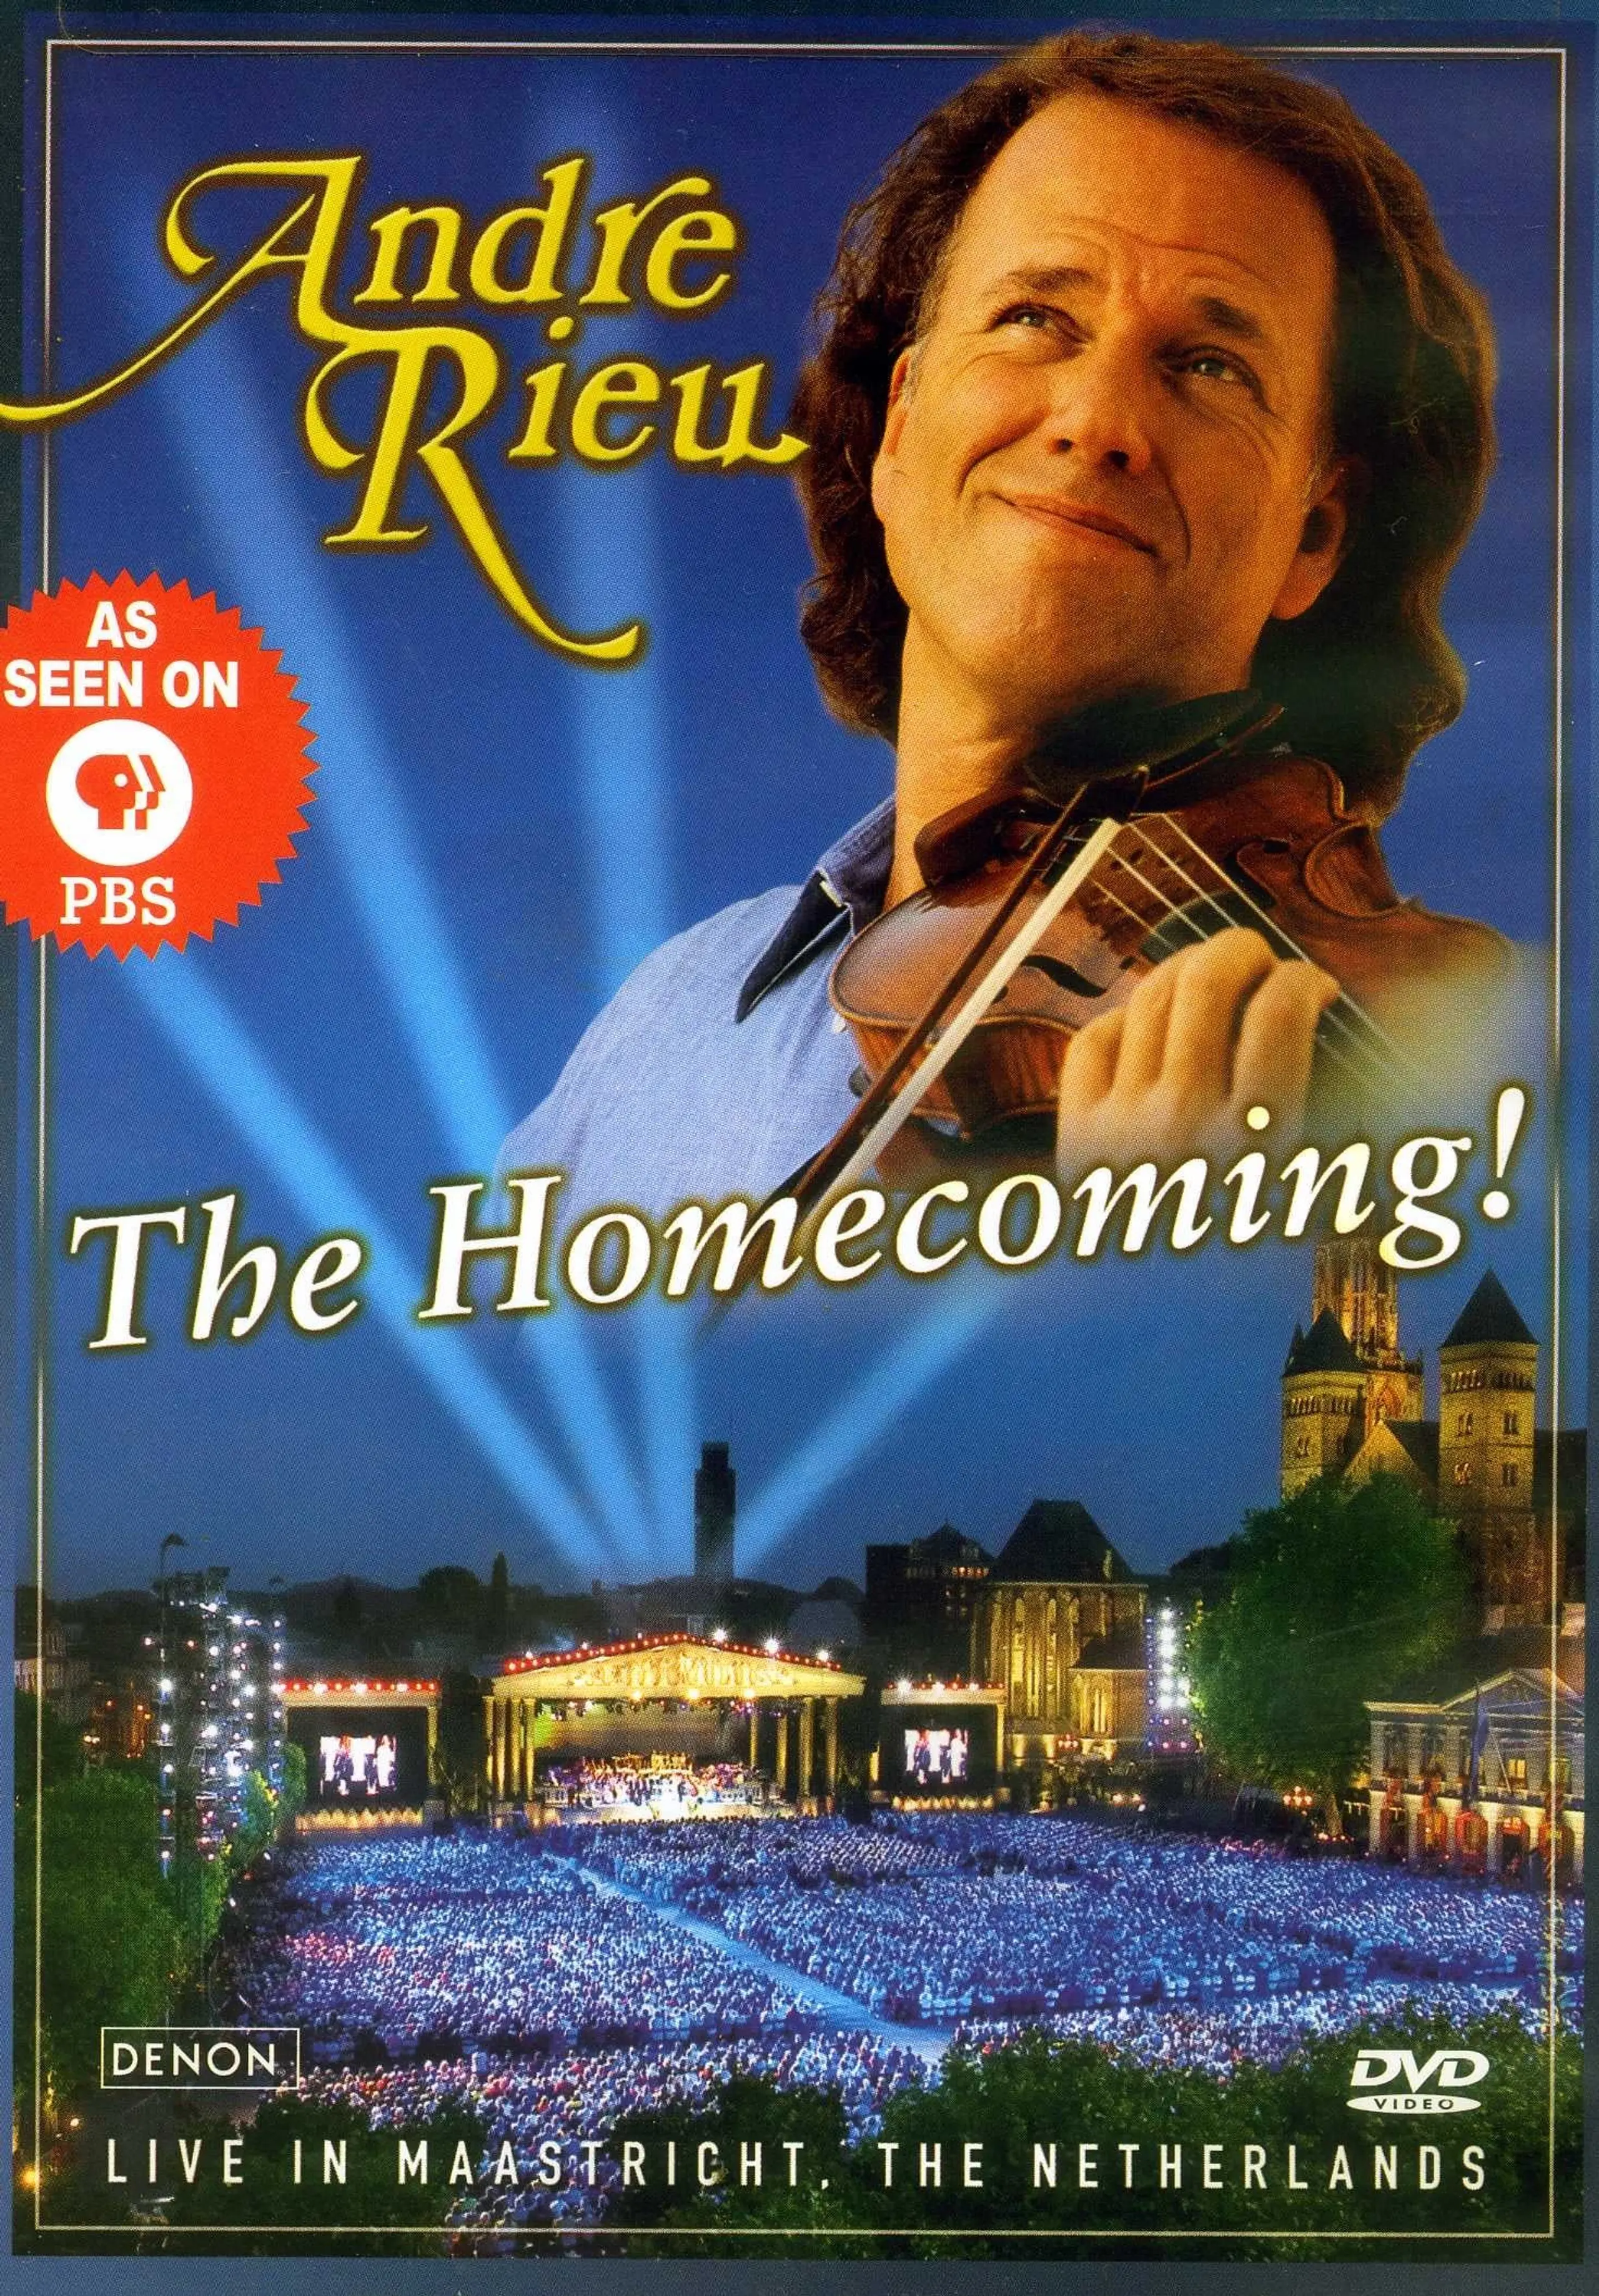 Andre Rieu: The Homecoming